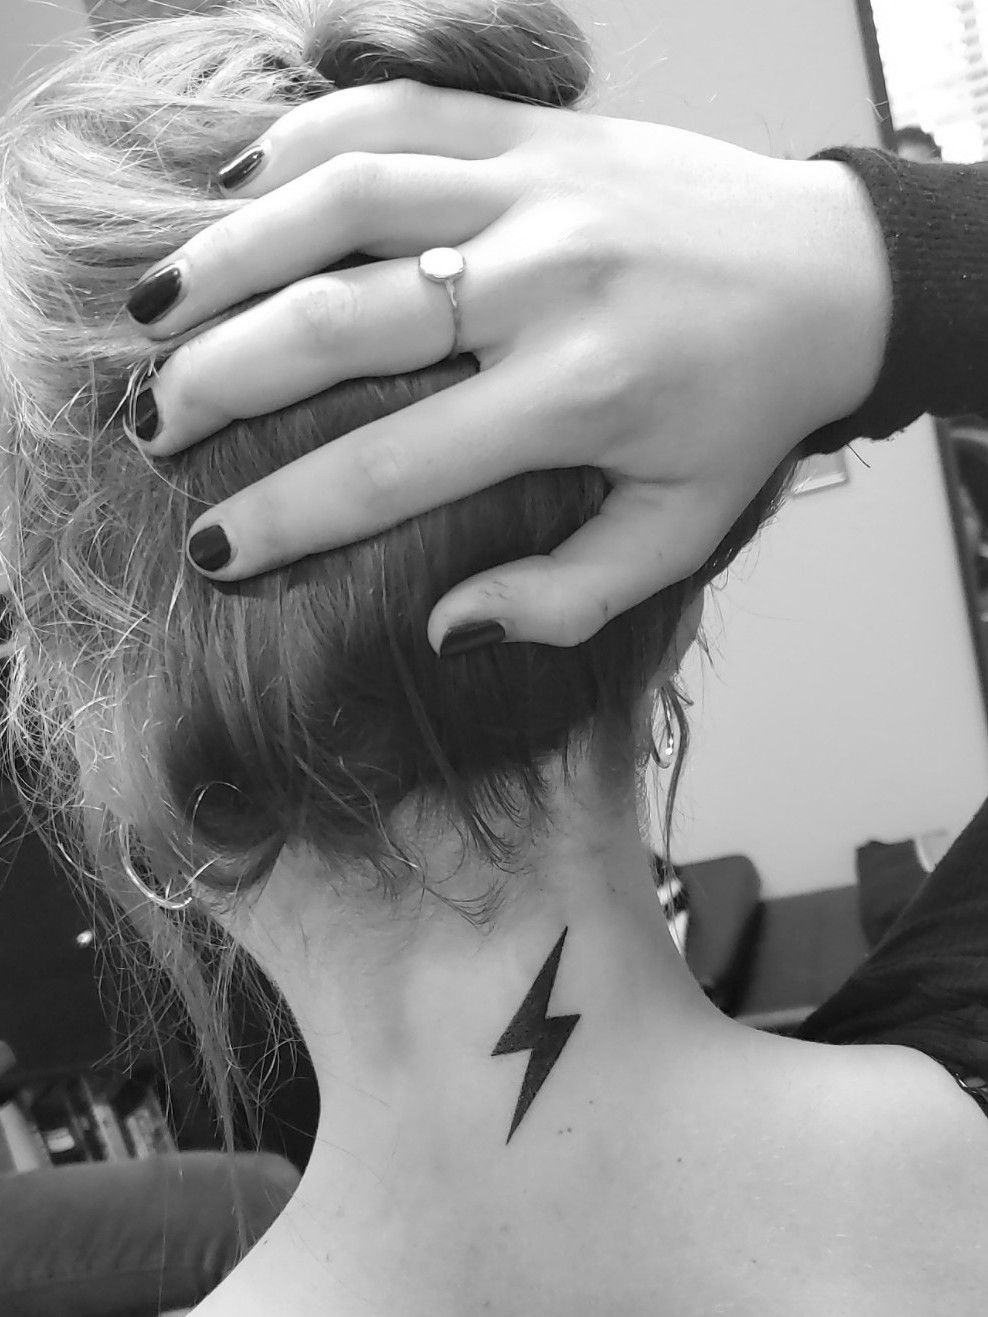 20 best lightning tattoo designs with meaning to inspire you  Tukocoke